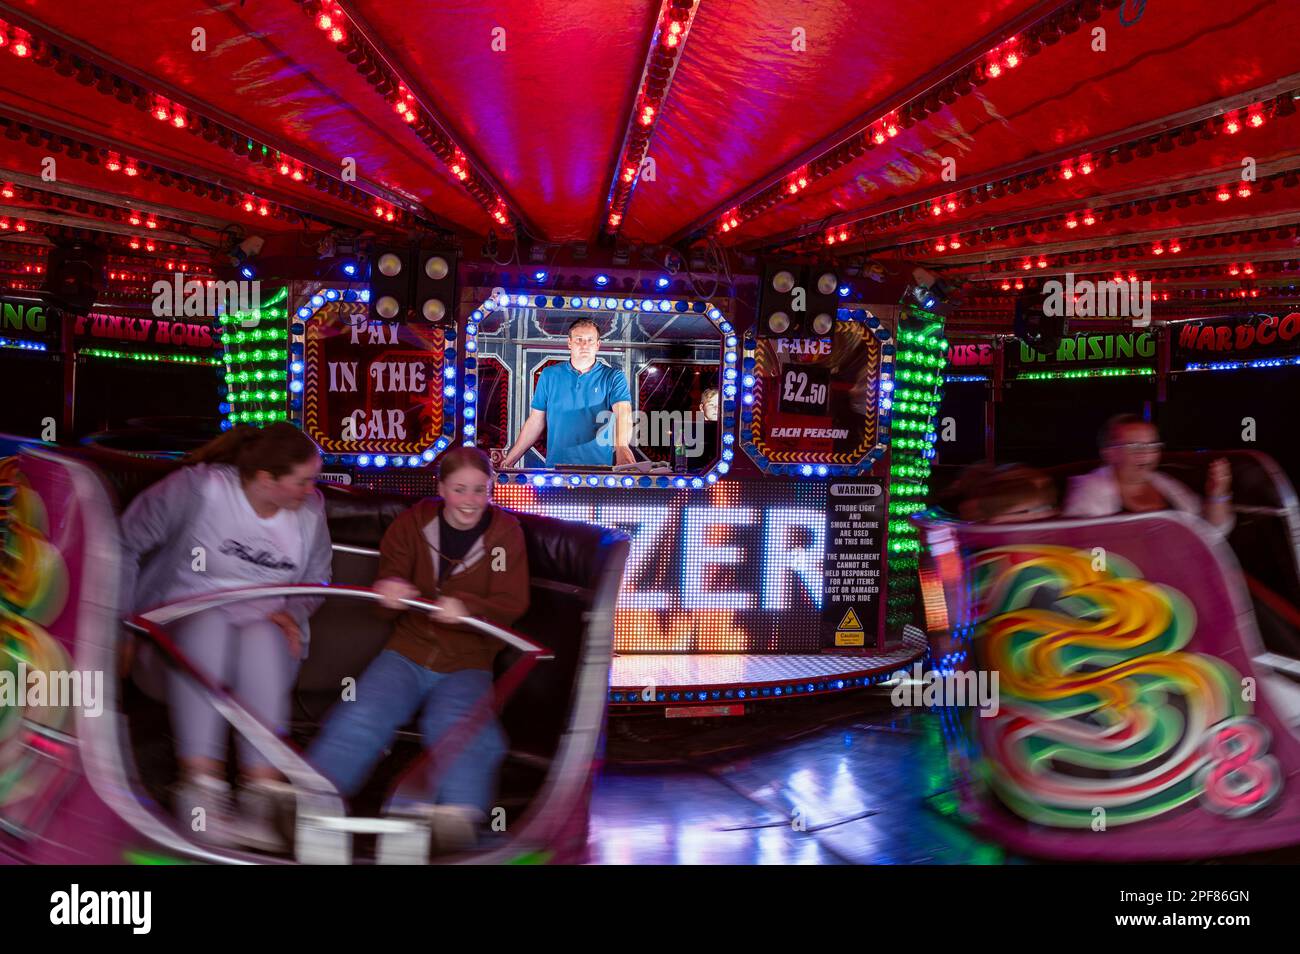 Teenage girls on a fairground waltzer ride with the operator in the booth behind Stock Photo